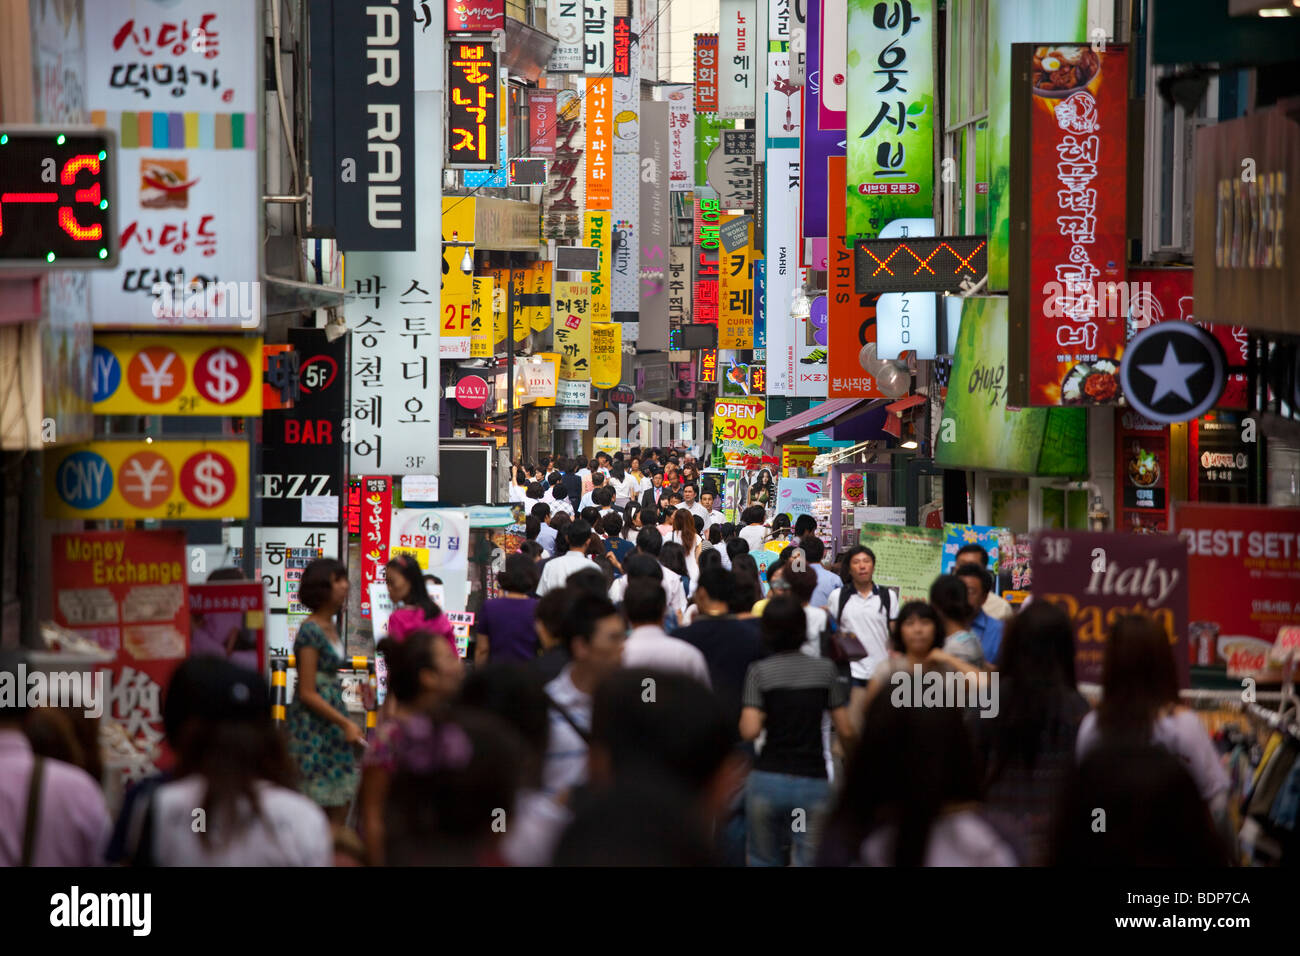 Myeongdong Market In Seoul South Korea Stock Photo Alamy Pagesbusinesseslocal service明洞 街 myeongdong street 명동 거리 首尔 ソウル seoul 서울videosdaytime of myeongdong night market places from west entrance to. https www alamy com stock photo myeongdong market in seoul south korea 25689674 html